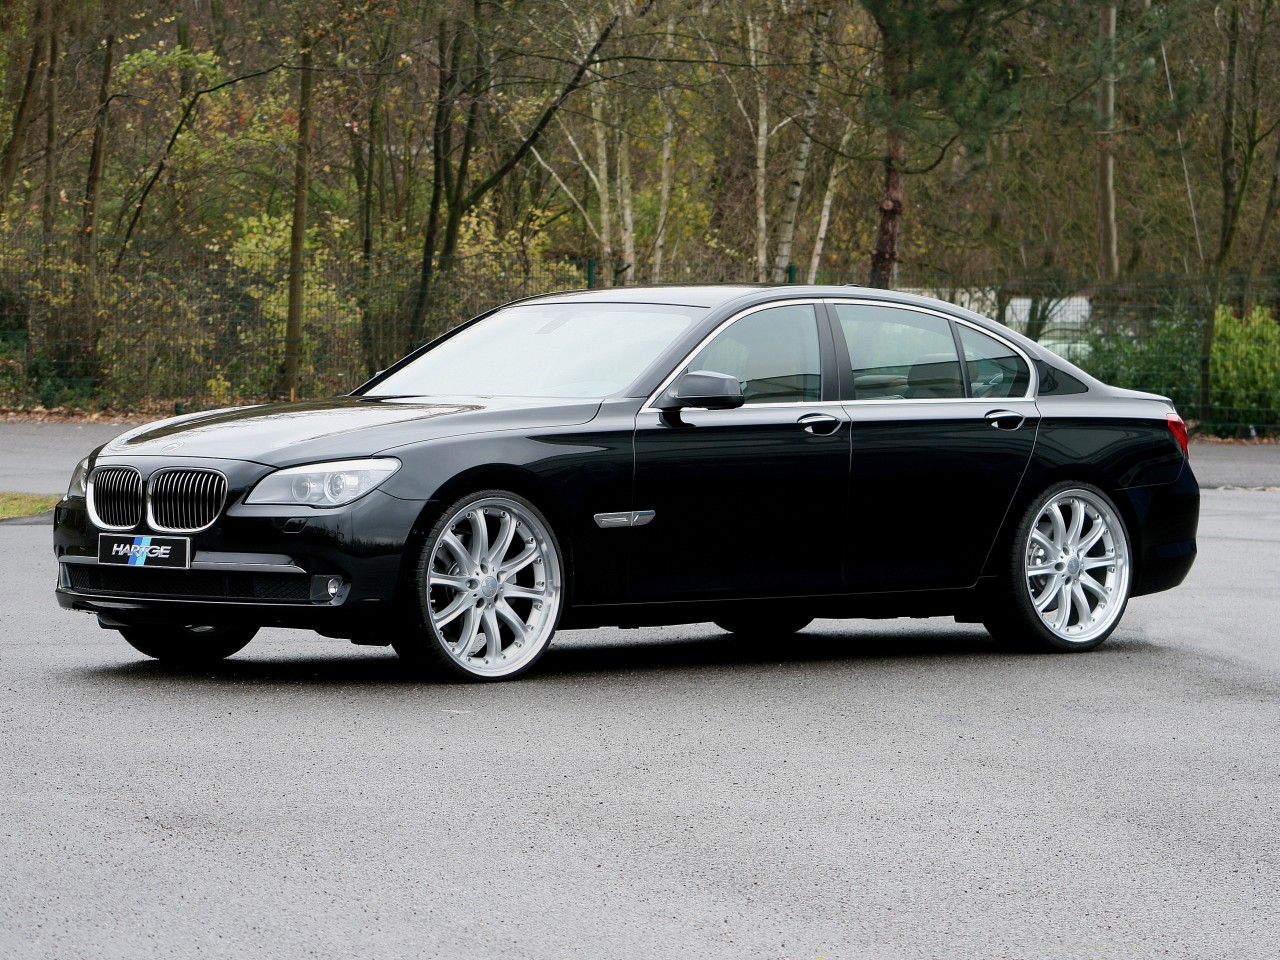 Hartge wheels for the new 2009 BMW 7 Series